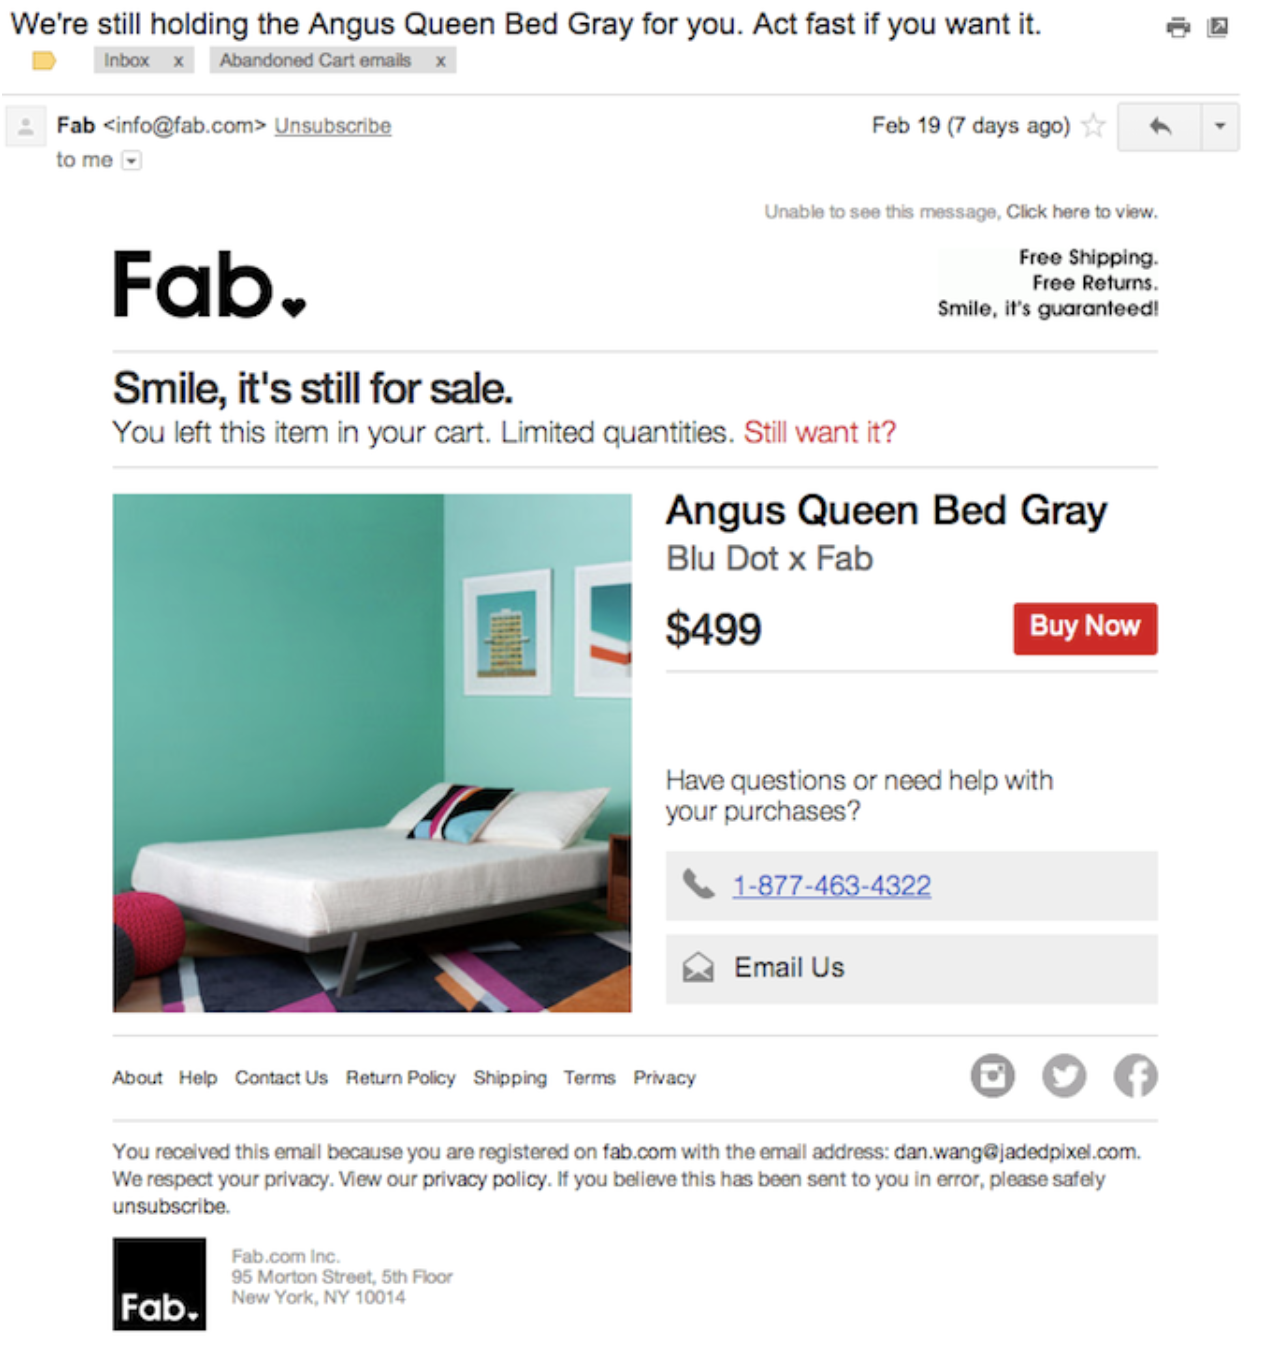 [Image Source](https://www.shopify.com/blog/12522201-13-amazing-abandoned-cart-emails-and-what-you-can-learn-from-them)